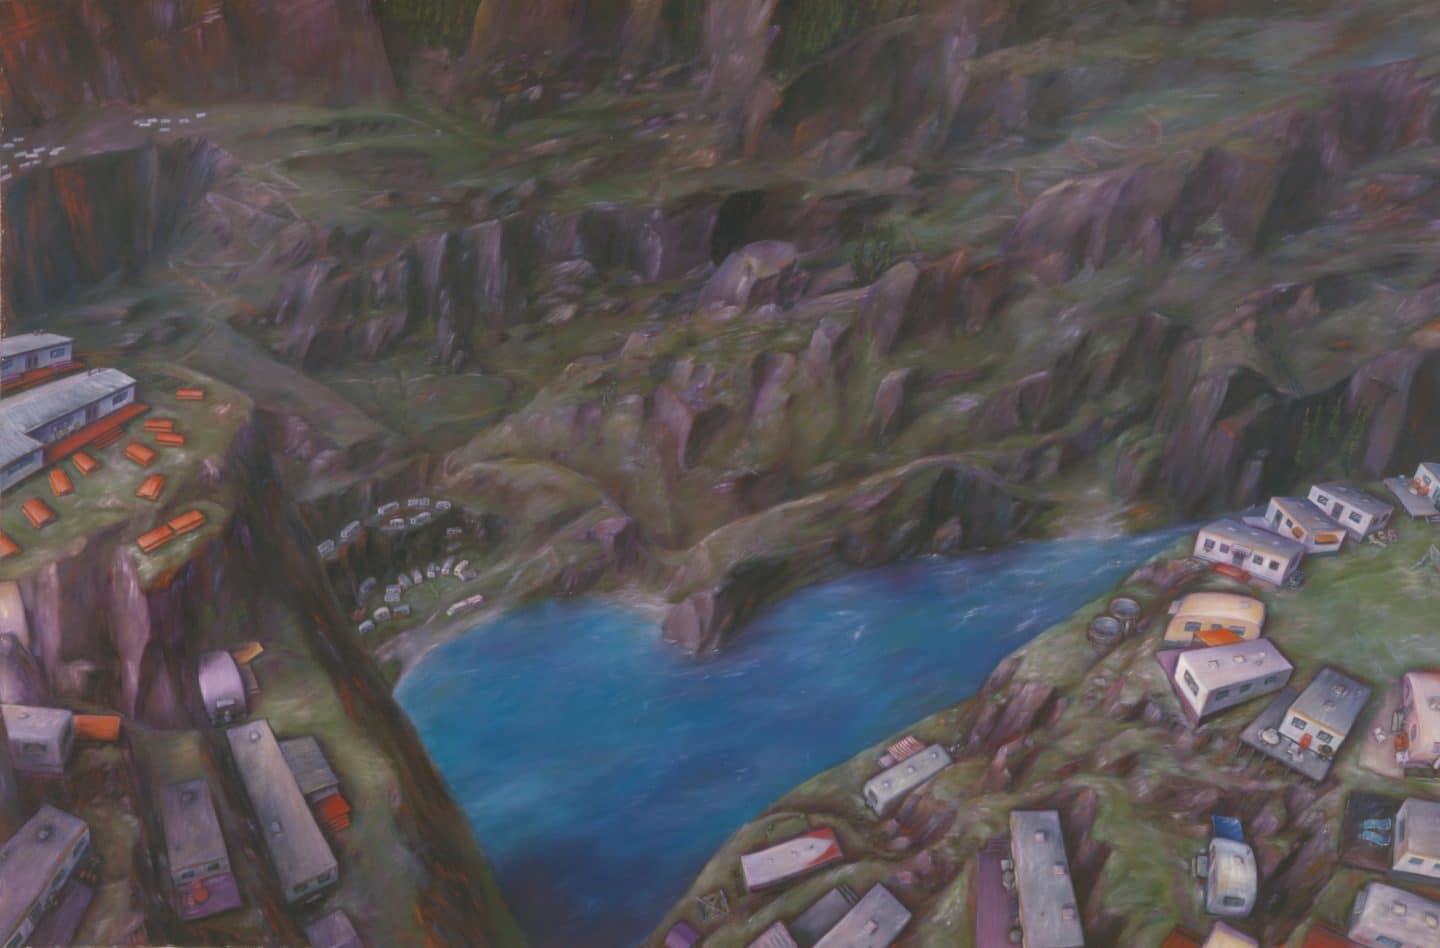 Eleanor Bond, Later, Some Industrial Refugees Form Communal Settlements in Logged Valley in B.C., 1987, oil on canvas